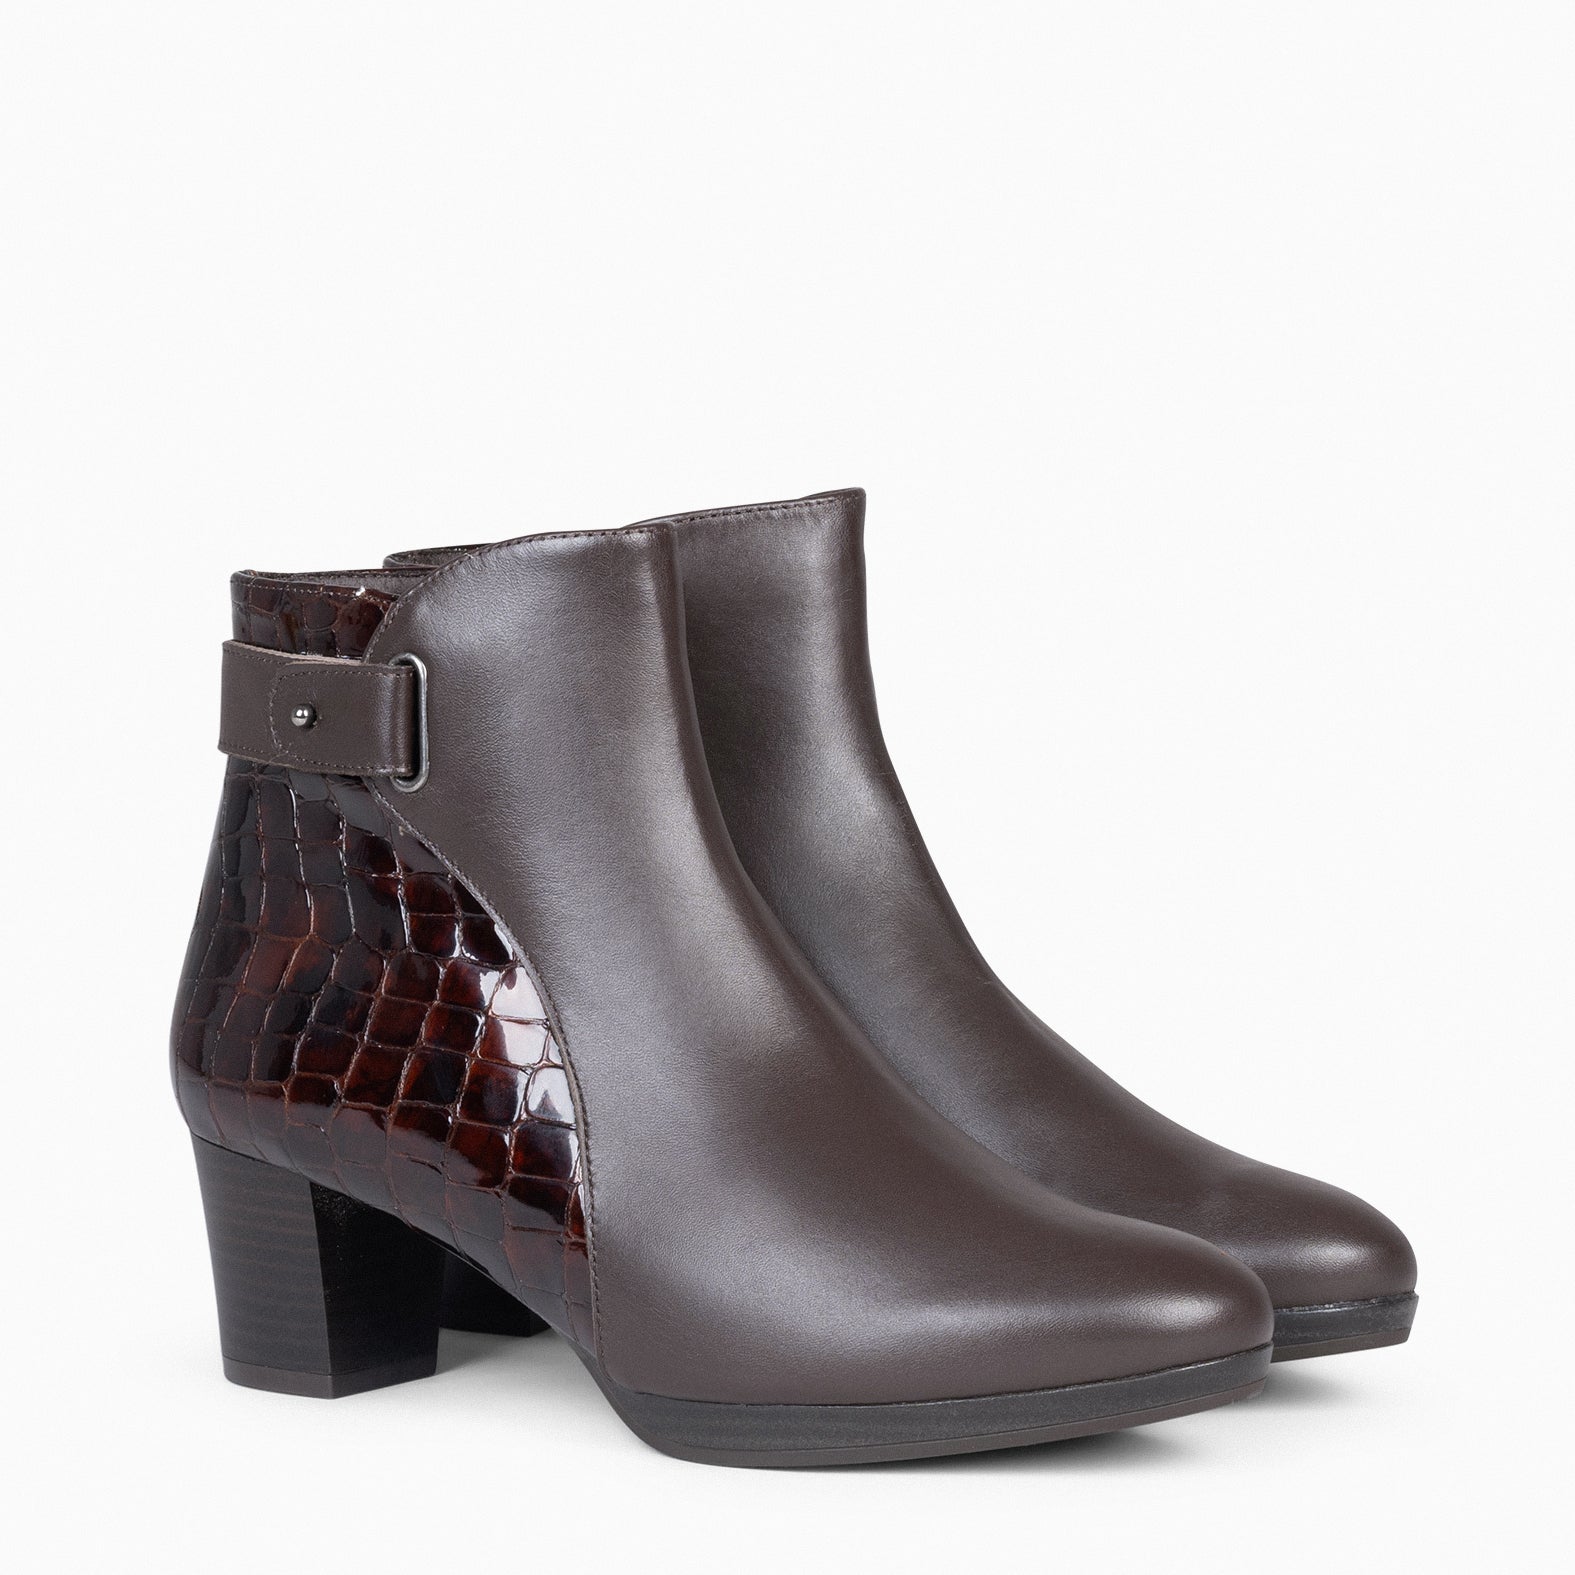 LENA – BROWN Rounded Booties